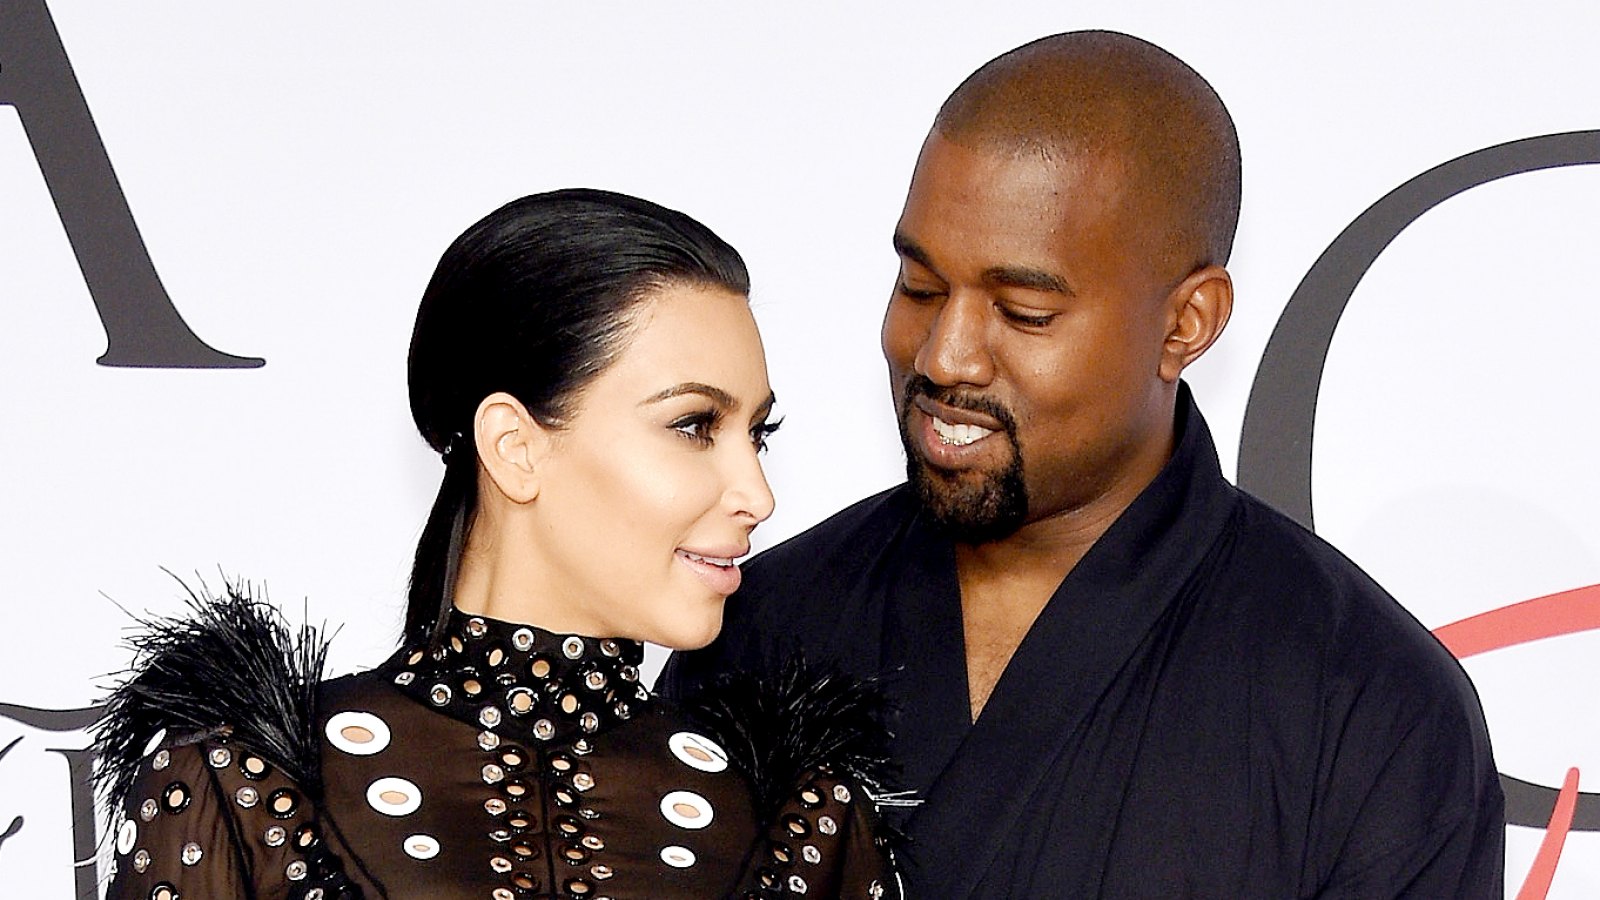 Kim Kardashian and Kanye West attend the 2015 CFDA Fashion Awards at Alice Tully Hall at Lincoln Center on June 1, 2015 in New York City. Dimitrios Kambouris/Getty Images